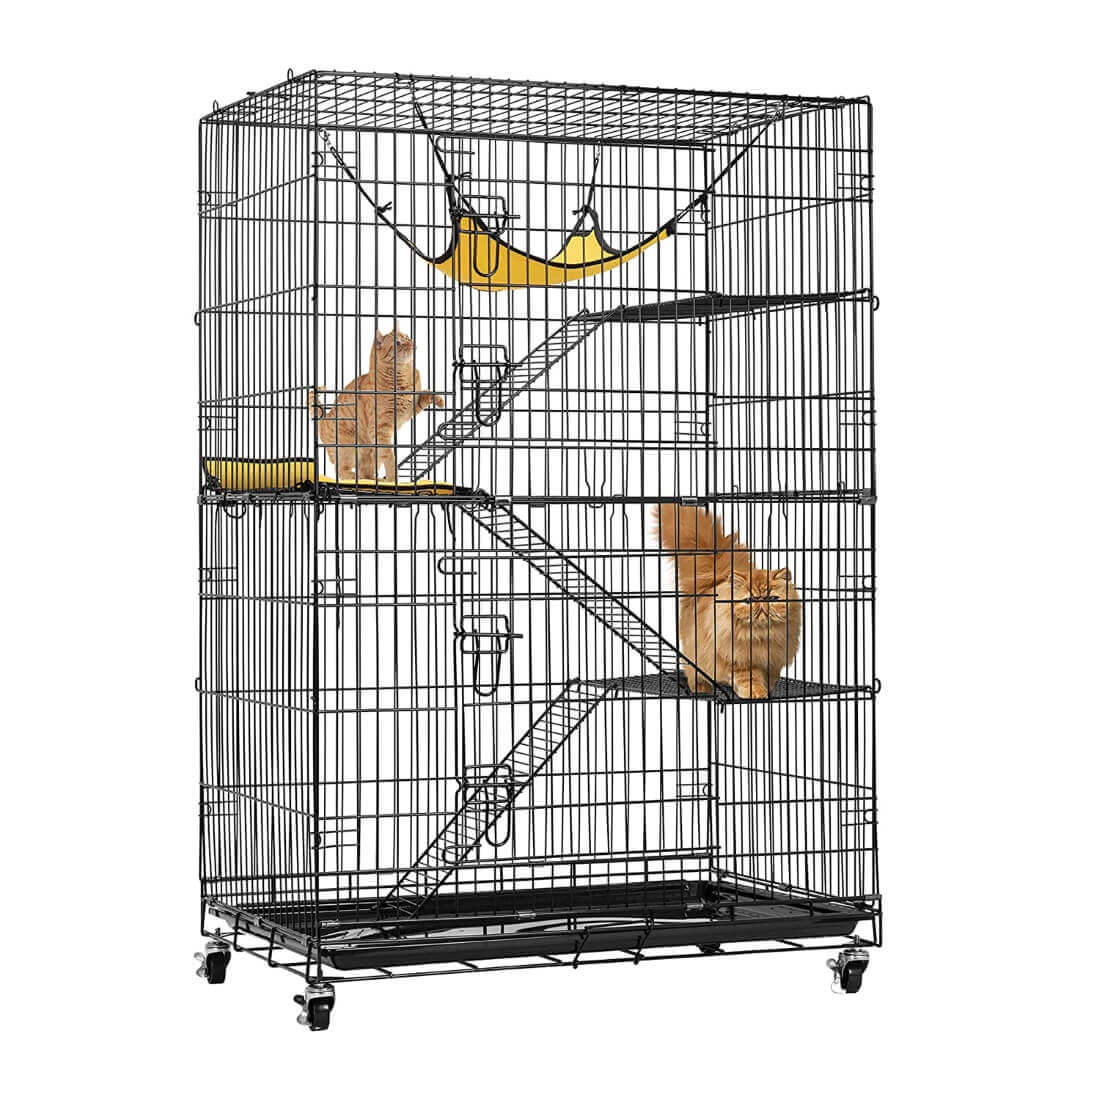  VIVOHOME 4-Tier 49 Inch Collapsible Metal Cat Kitten Ferret Cage 360° Rotating Casters Enclosure Pet Playpen with Ramp Ladders Hammock and Bed